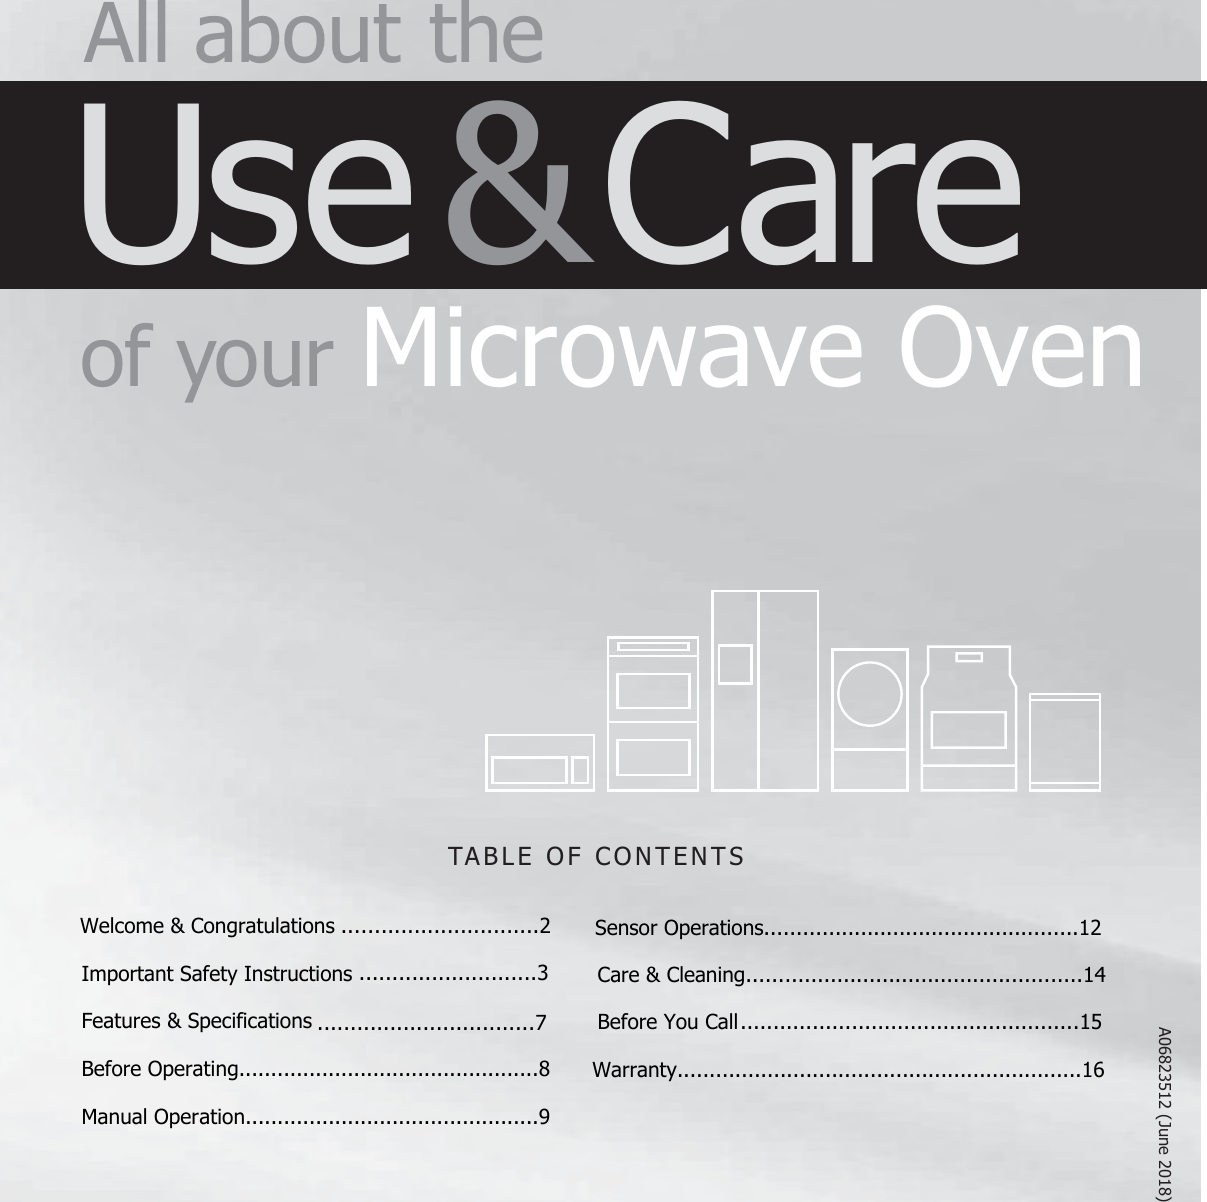 TABLE OF CONTENTS All about  theUse &amp; Care of  your Microwave Oven1 20Welcome &amp; Congratulations ..............................2Important Safety InstructionsFeatures &amp; SpecificationsBefore Operating...............................................8Manual Operation..............................................9Sensor Operations.................................................12Care &amp; Cleaning....................................................14Before You Call....................................................15Warranty..........................................................................................3.................................7JuneA06823512 (8)16